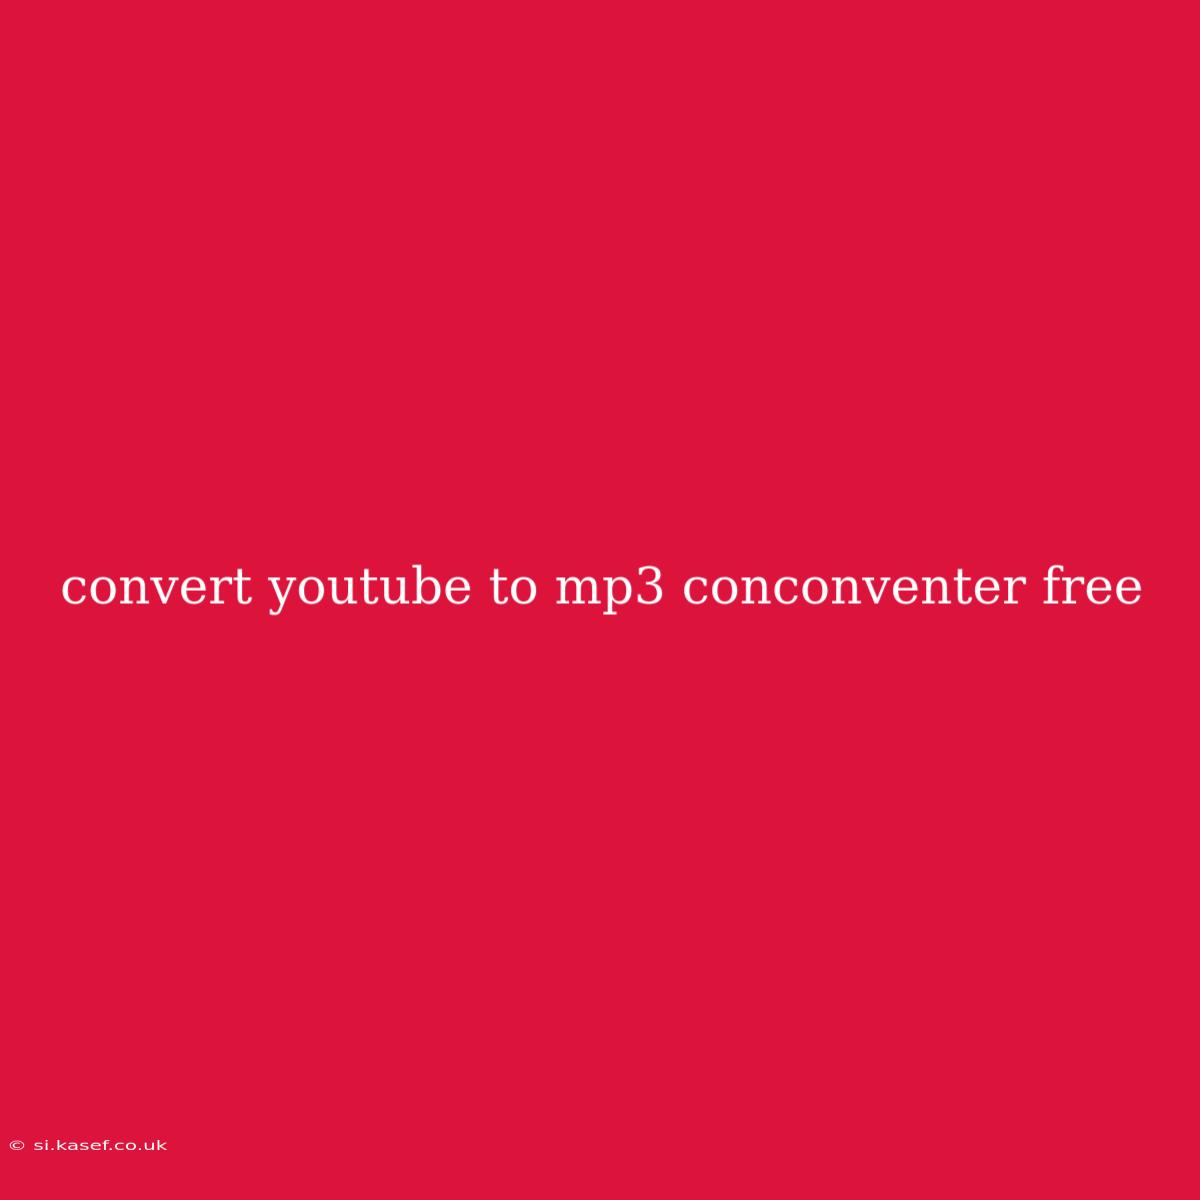 Convert Youtube To Mp3 Conconventer Free